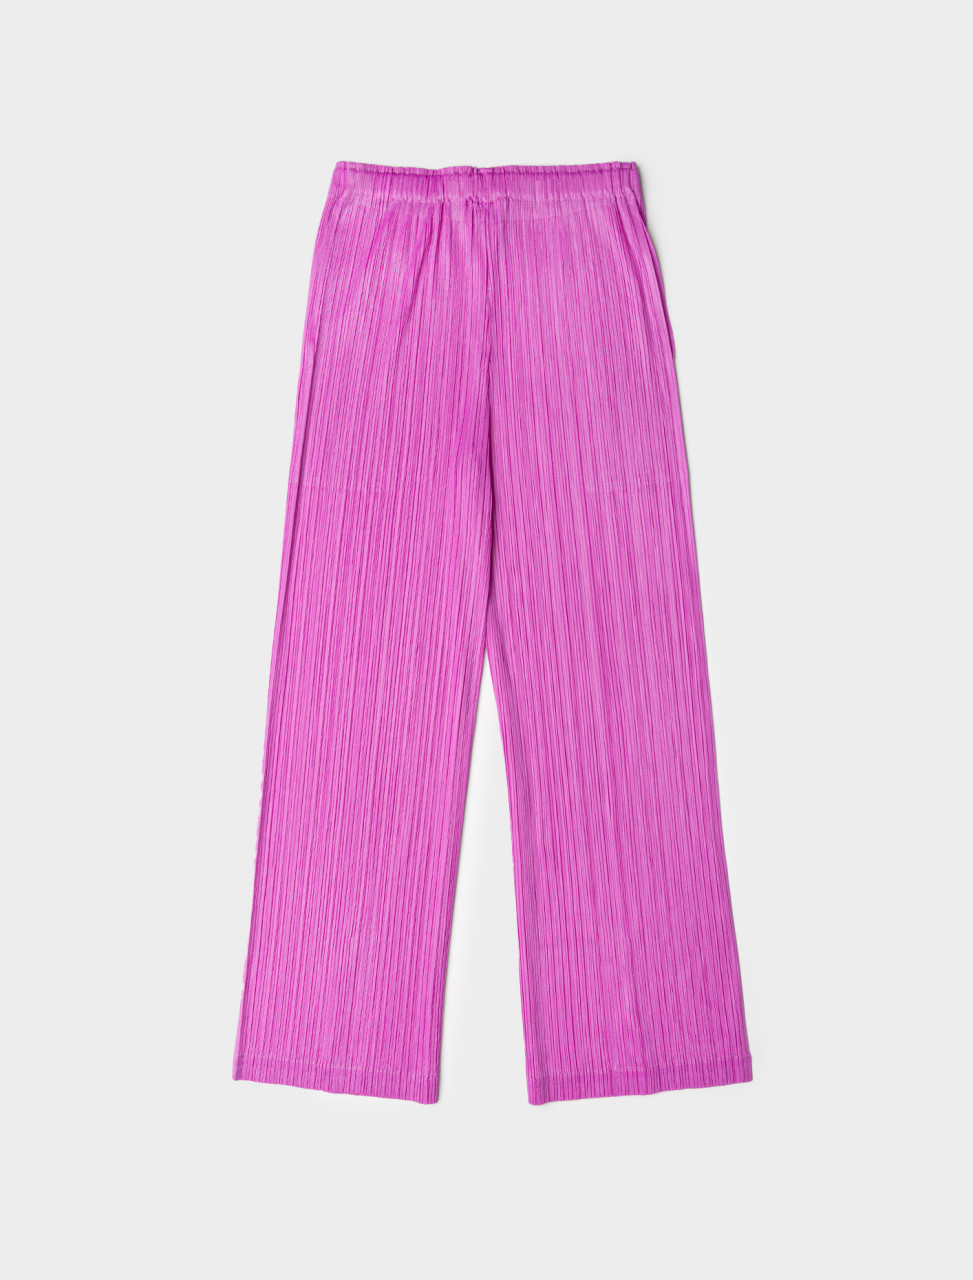 Pleats Please Issey Miyake Pleated Trousers in Fuchsia | Voo Store ...